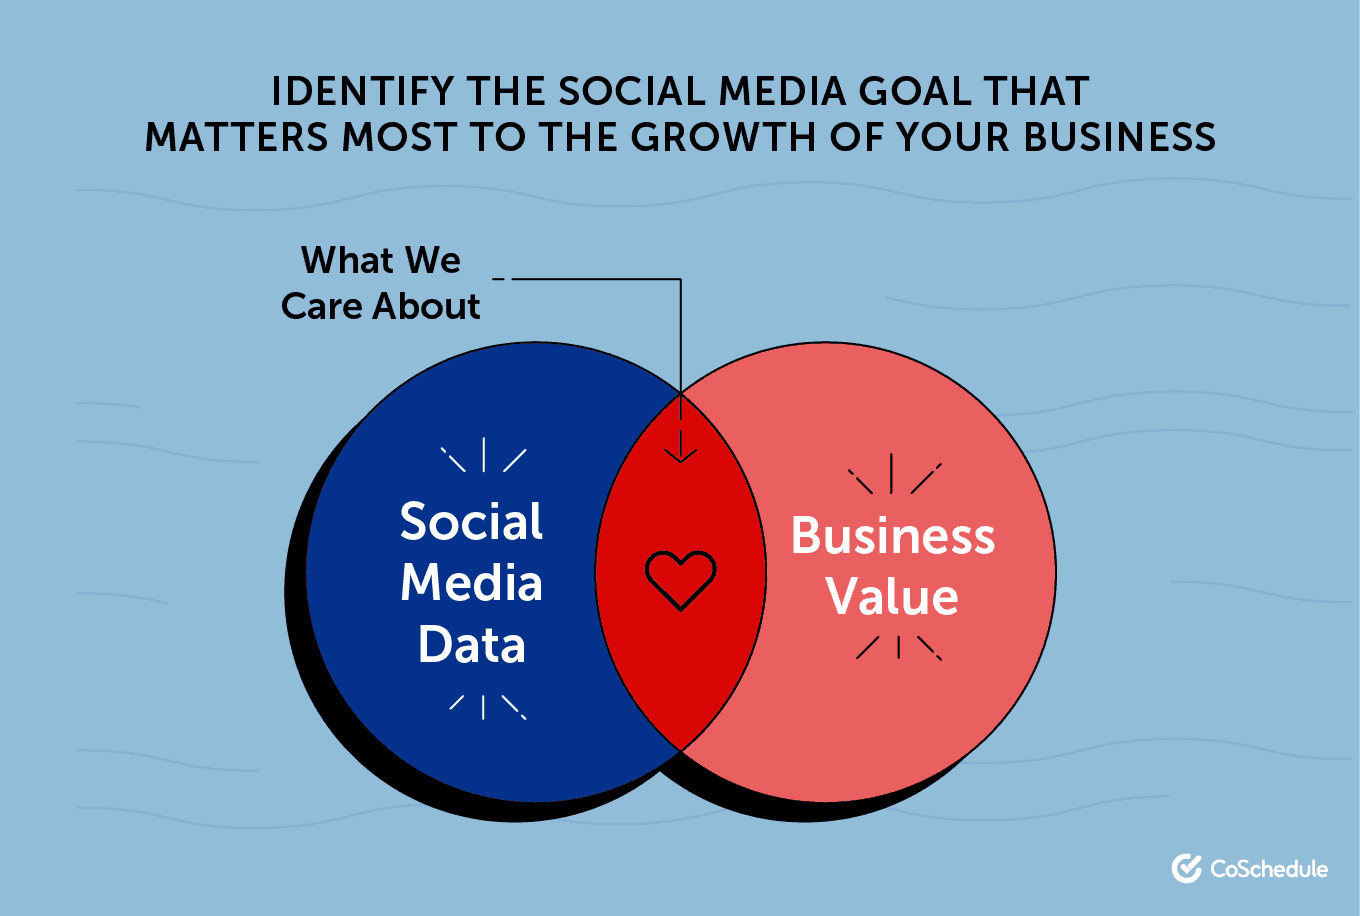 Identify the social media goal that matters most to the growth of your business